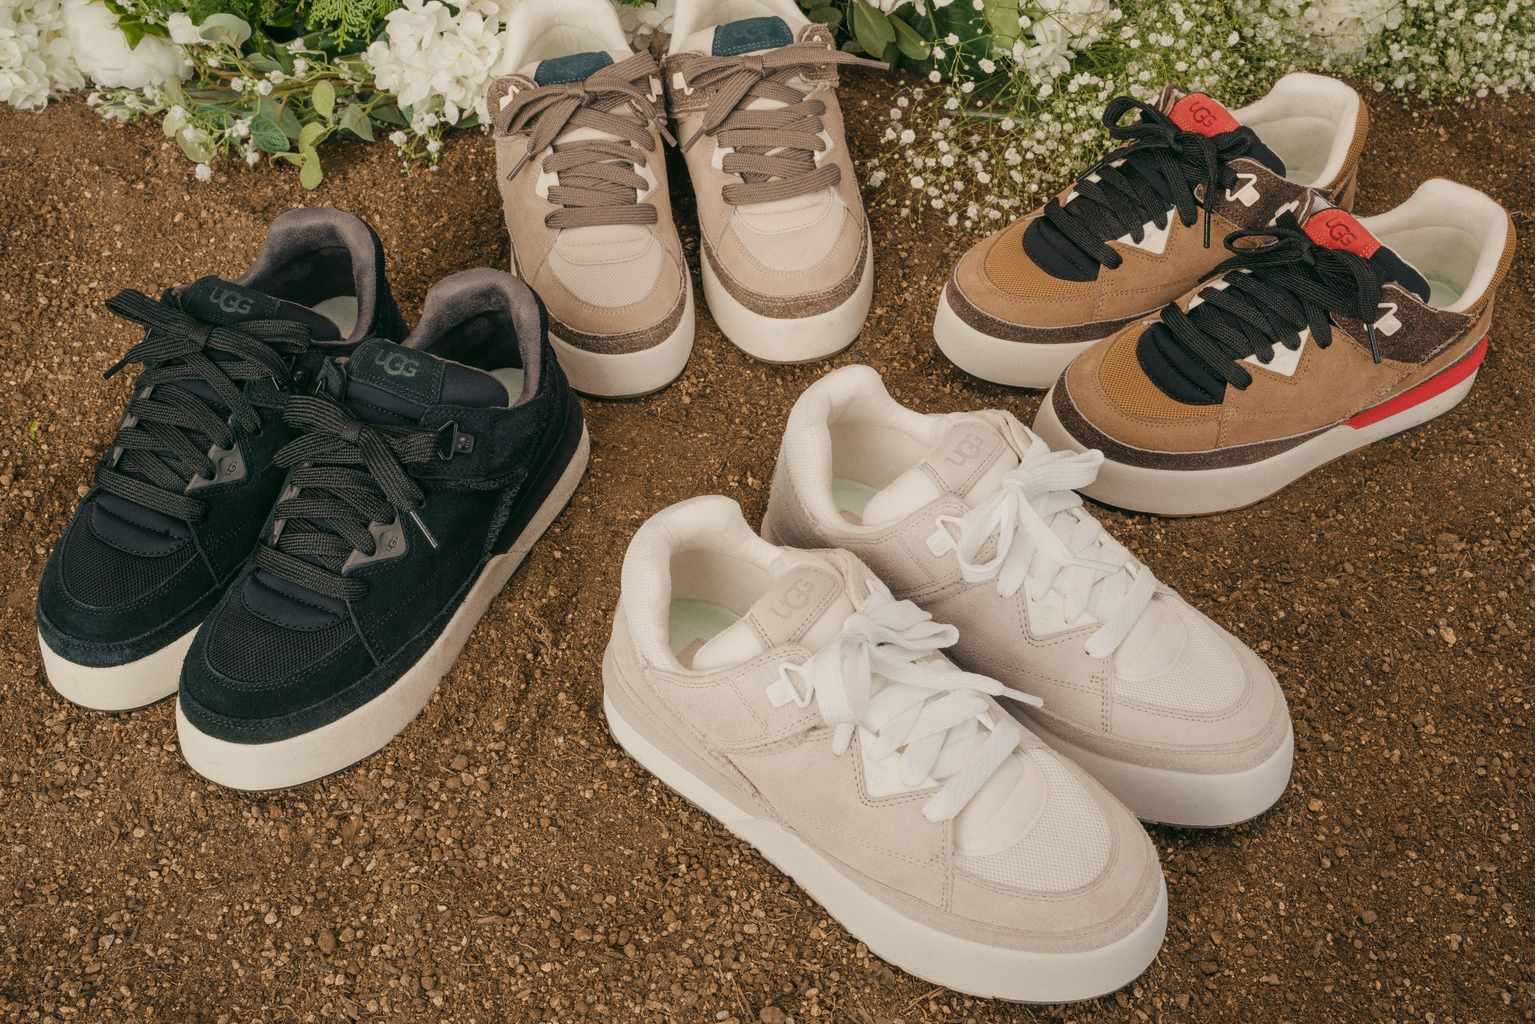 UGG’s New Sneaker Doesn’t Look Like an UGG